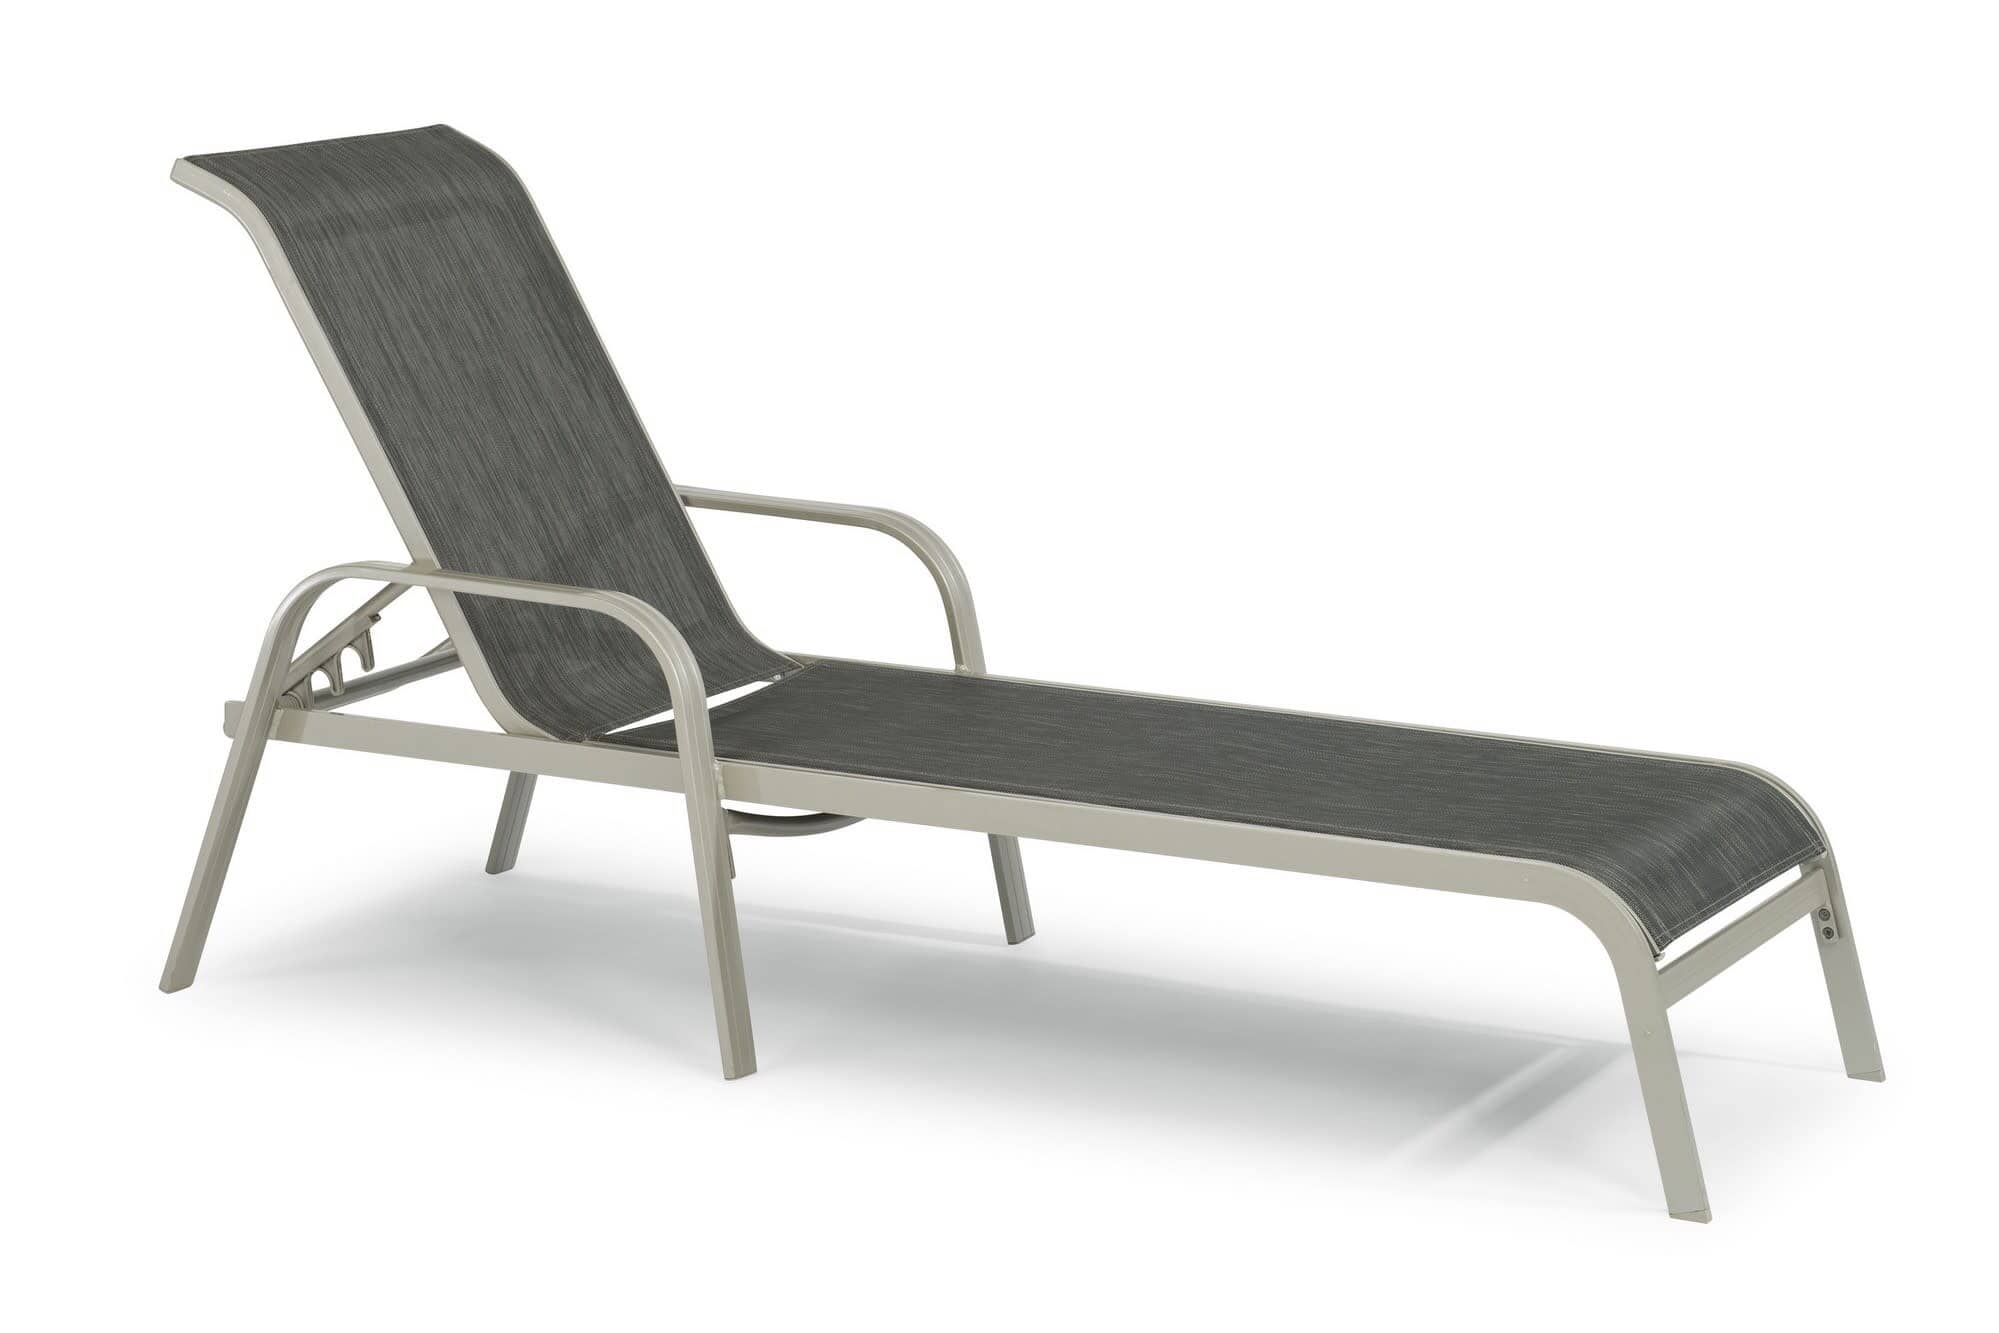 Modern & Contemporary Outdoor Chaise Lounge By Captiva Outdoor Seating Captiva